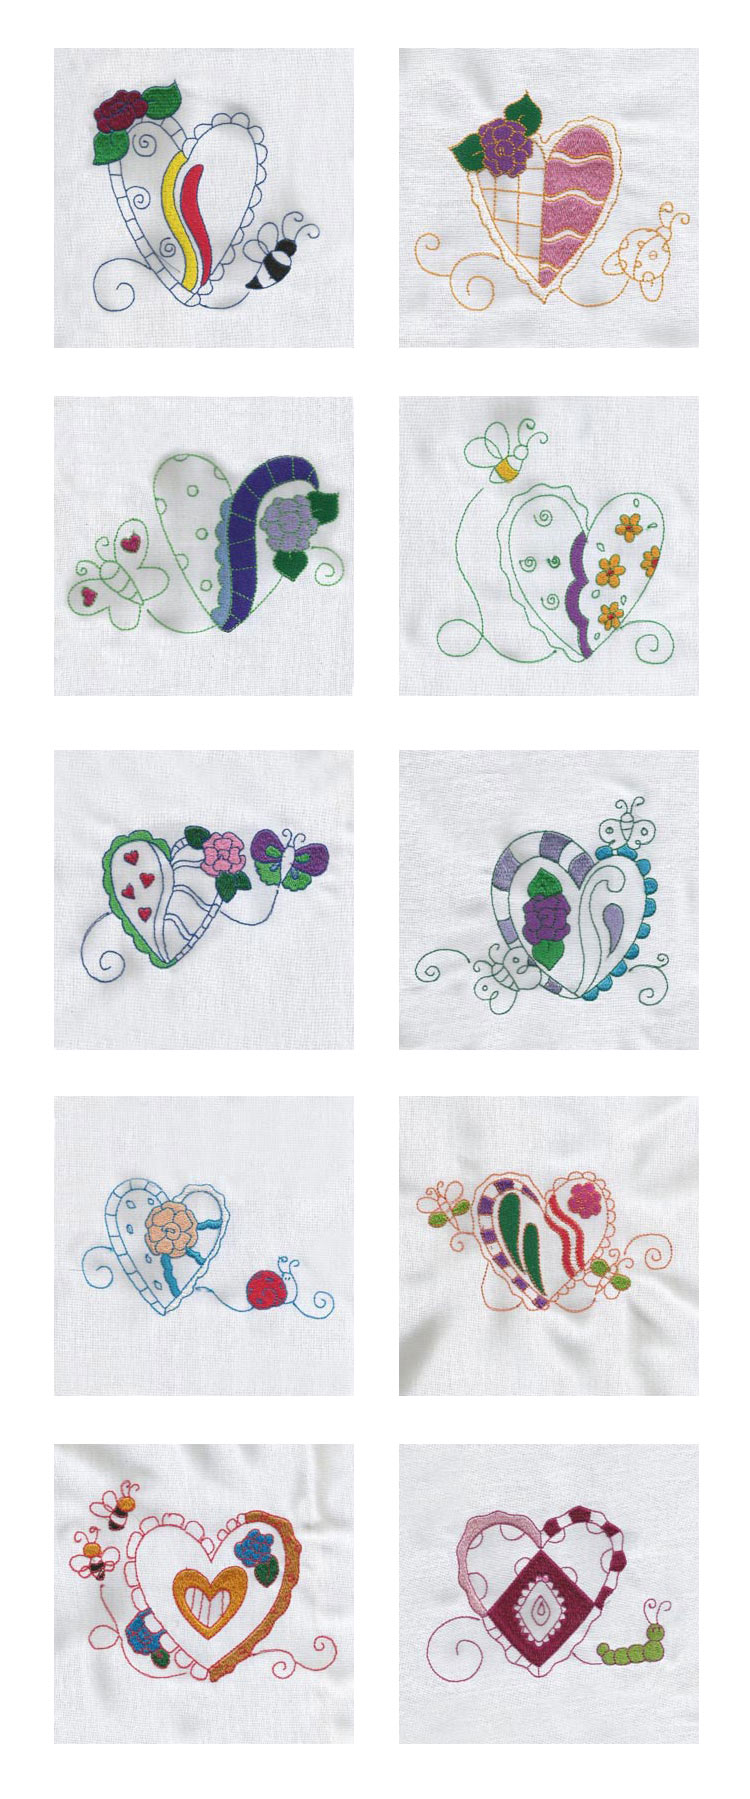 Partially Filled Hearts and Bugs Embroidery Machine Design Details